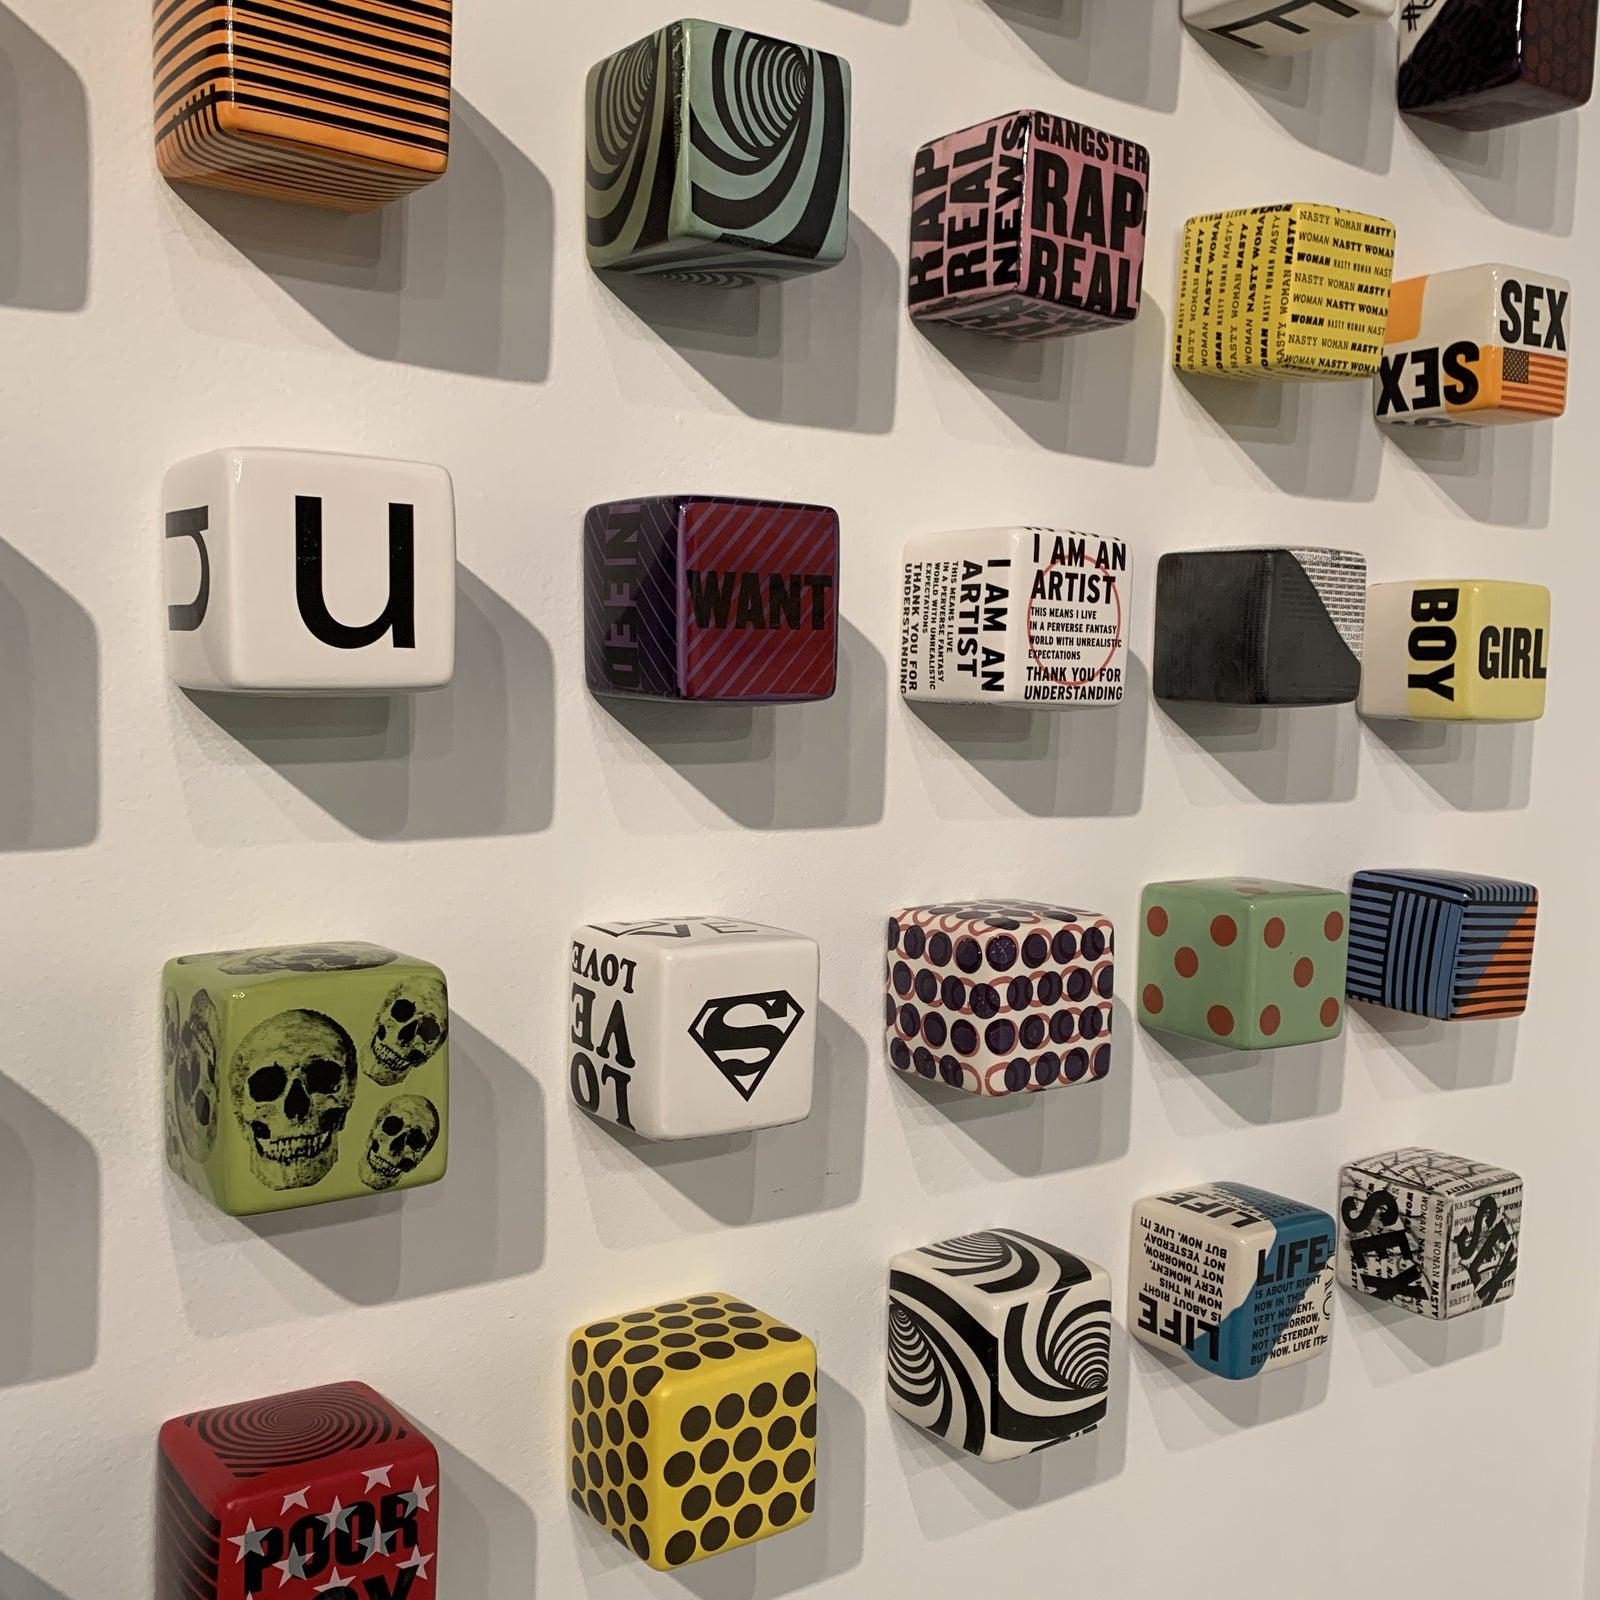 4 x 4 Cube Sold Separately
Signed by Artist: Kaiser Suidan
Easy To Hang
Look fabulous in a grouping


From first generation Lebanese descent, Kaiser Suidan was raised in a large family, six brothers and one sister, in small town Milford Michigan.